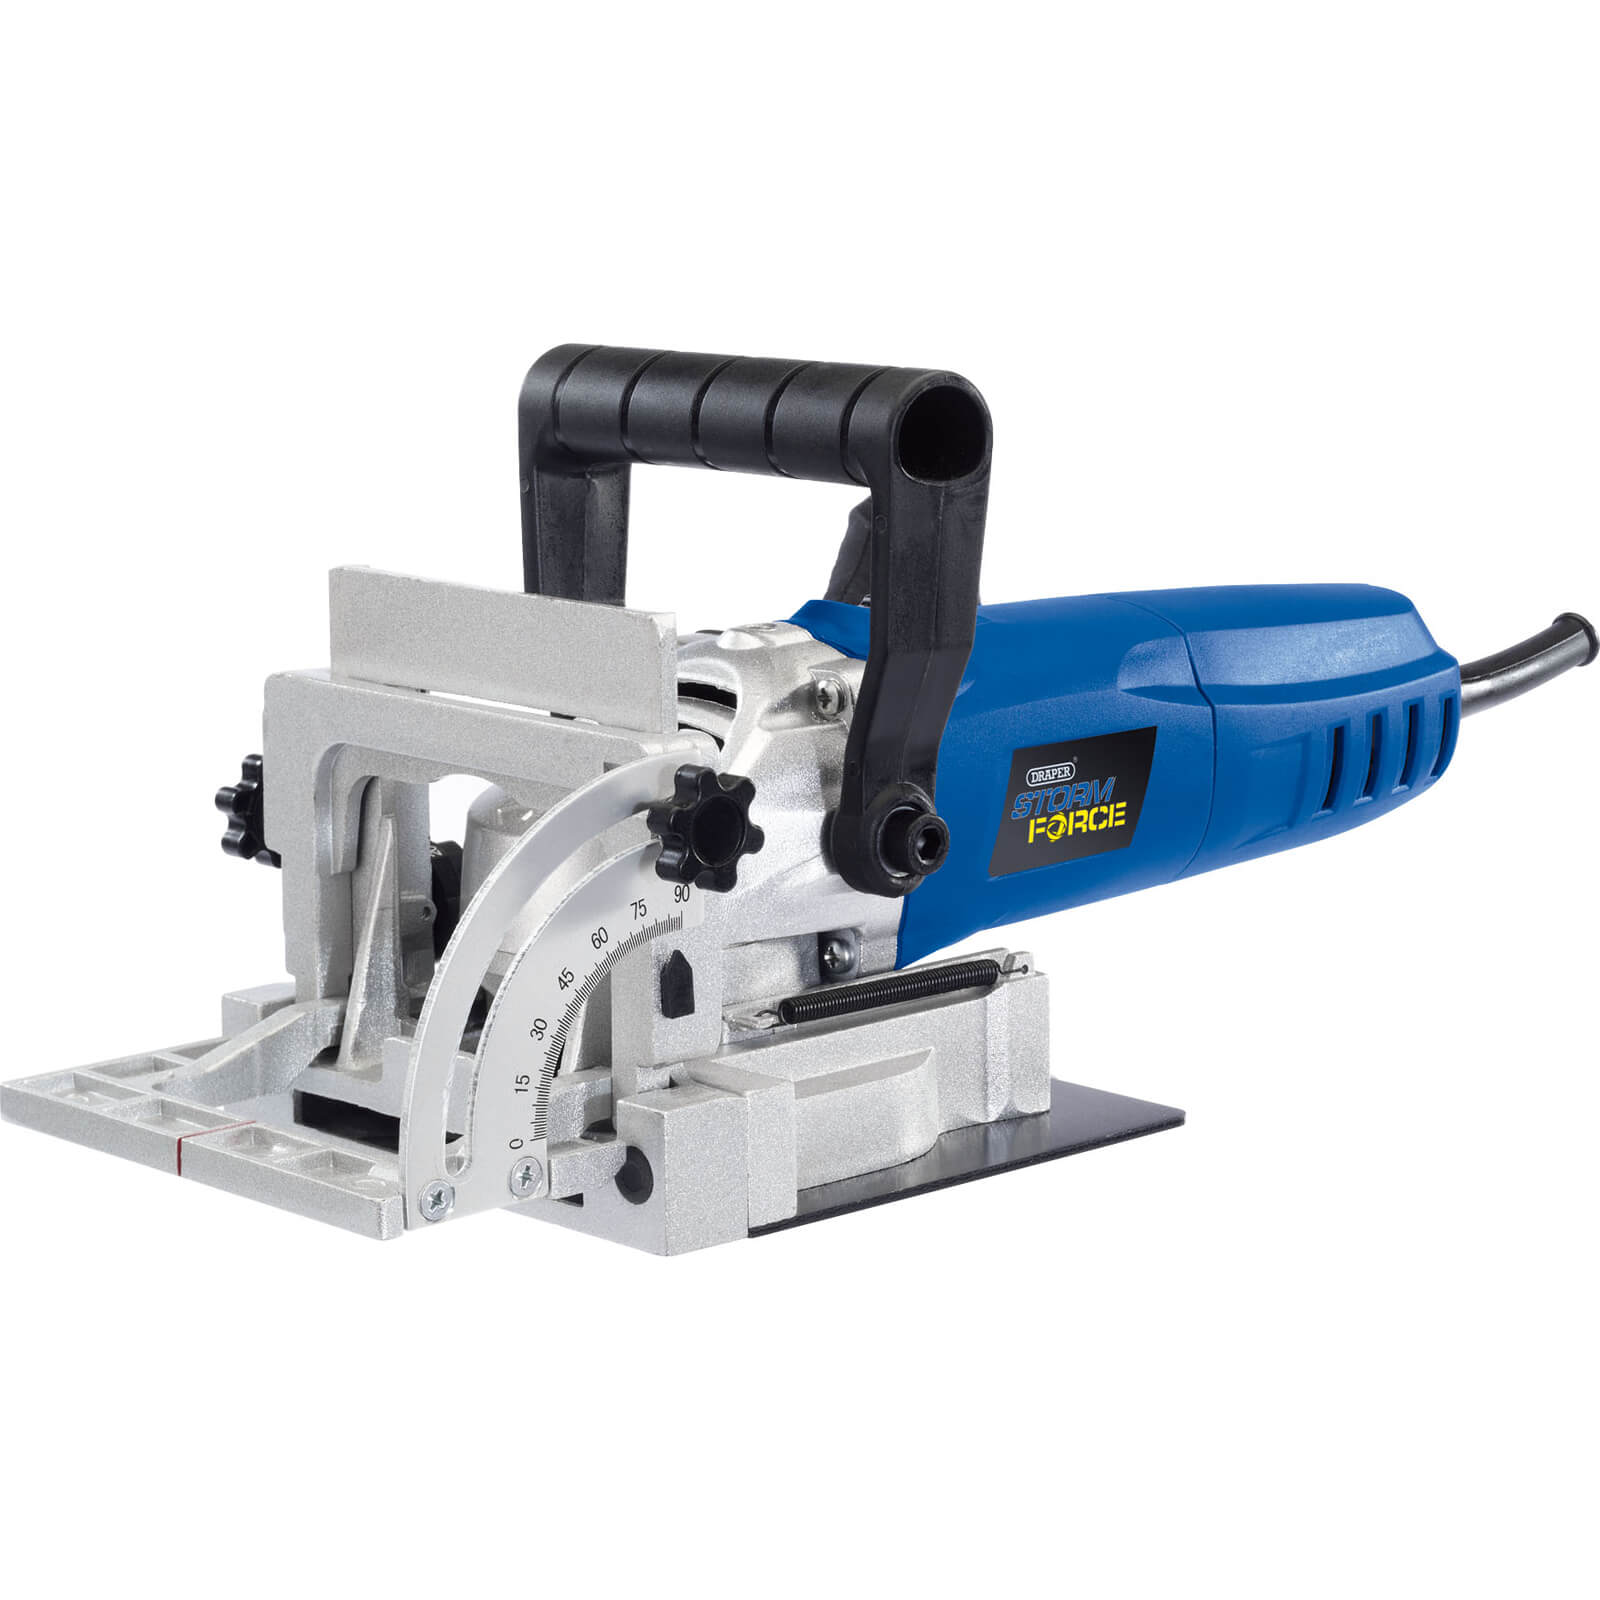 Photo of Draper Pt8100sf Storm Force Biscuit Jointer 240v